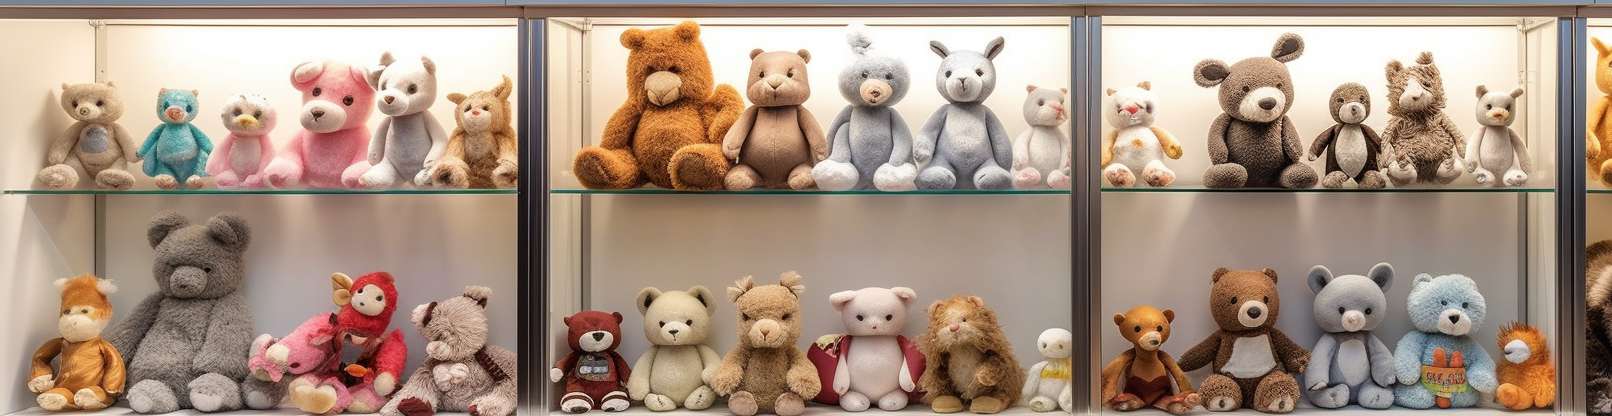 EPBOT: 10 Clever Ways To Display Your Plush Toys - That Don't